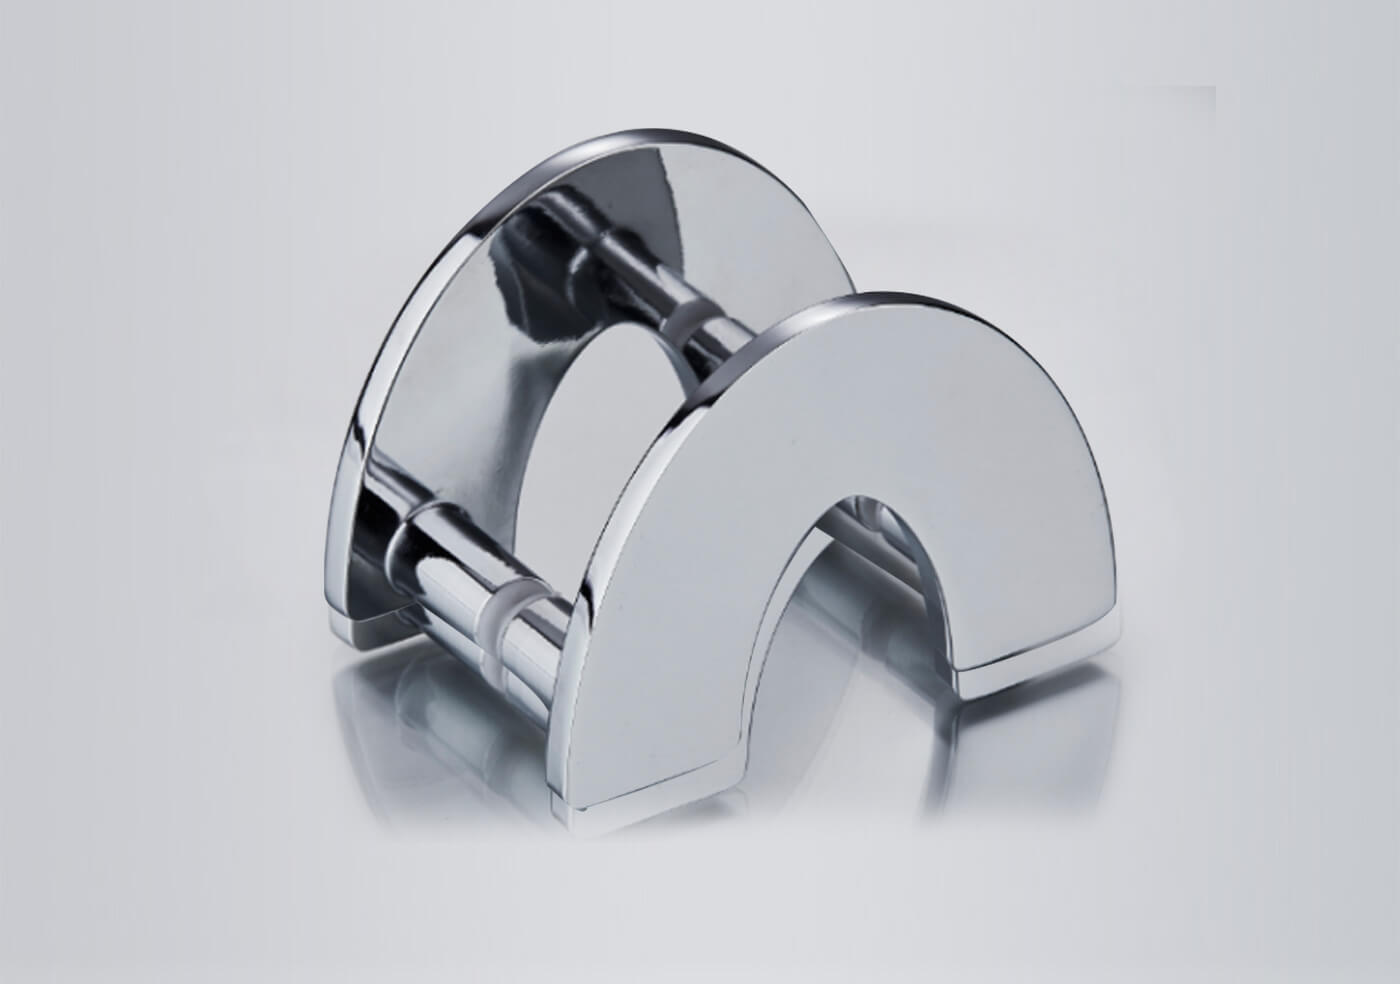 A shower door handle is a hardware component that is used to open, close, and grip a shower door